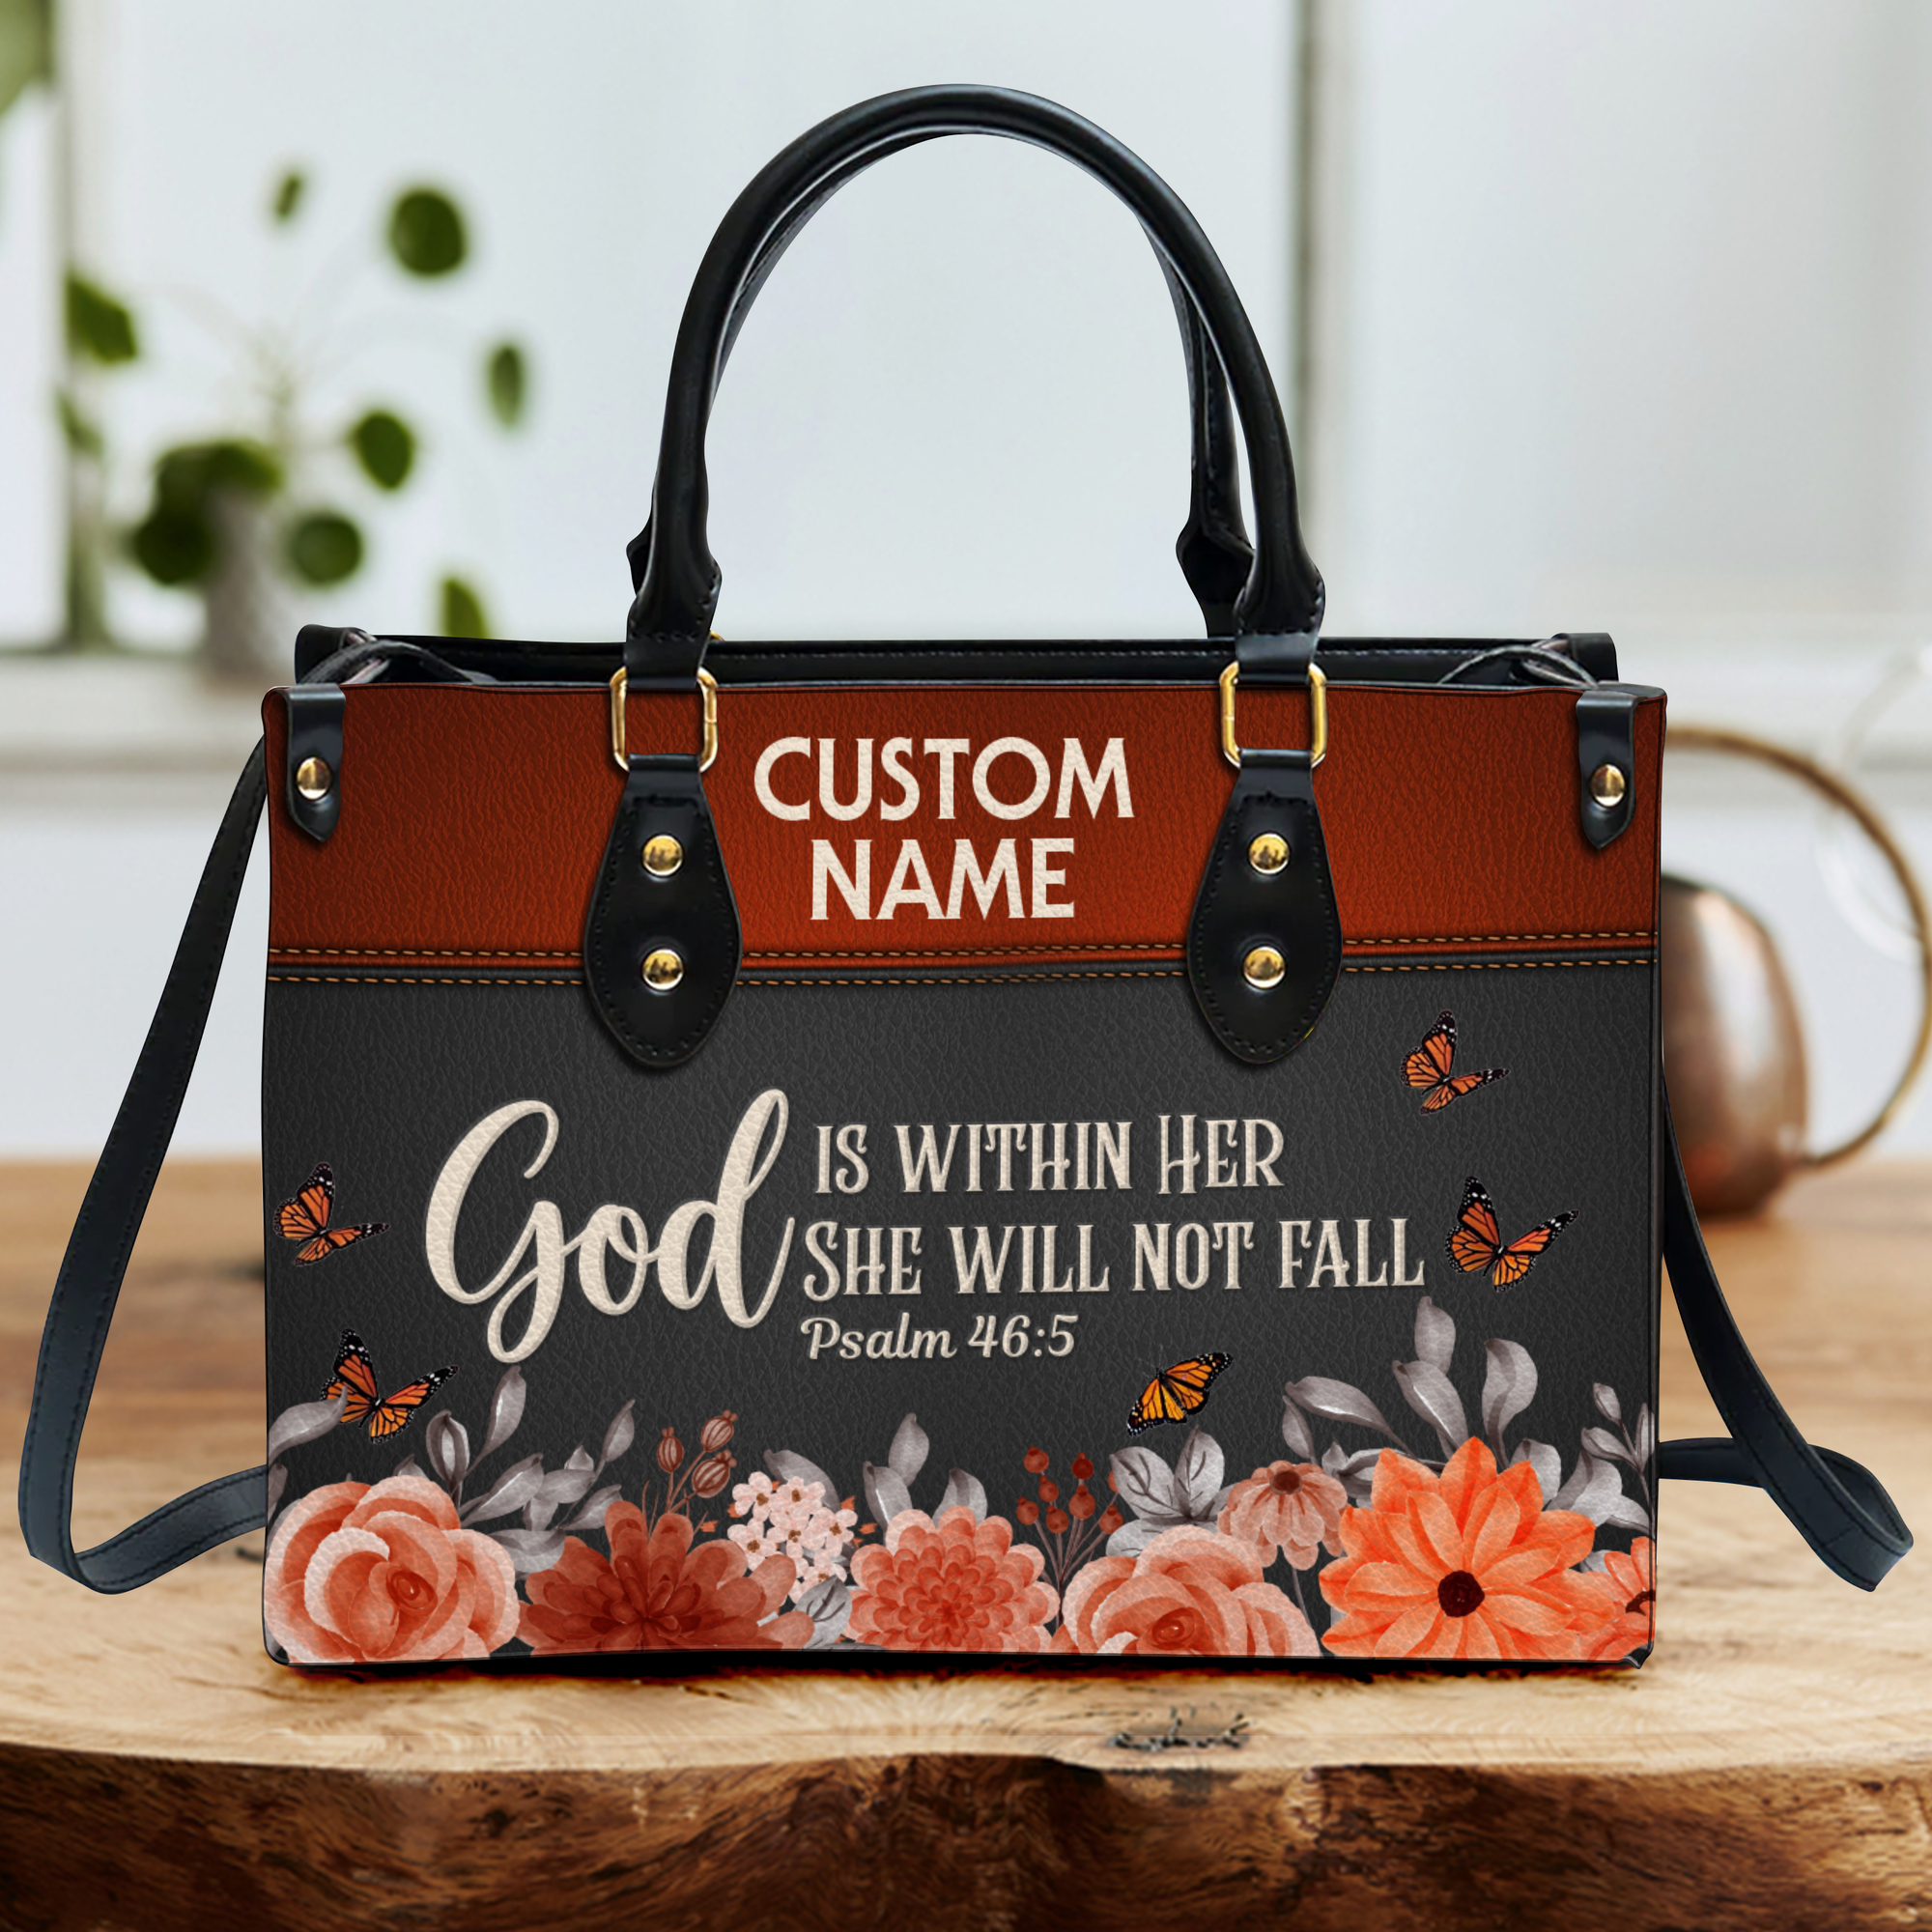 Vintage Red Flower Inspirational She Will Not Fall Custom Leather Handbag - Personalized Custom Leather Bag